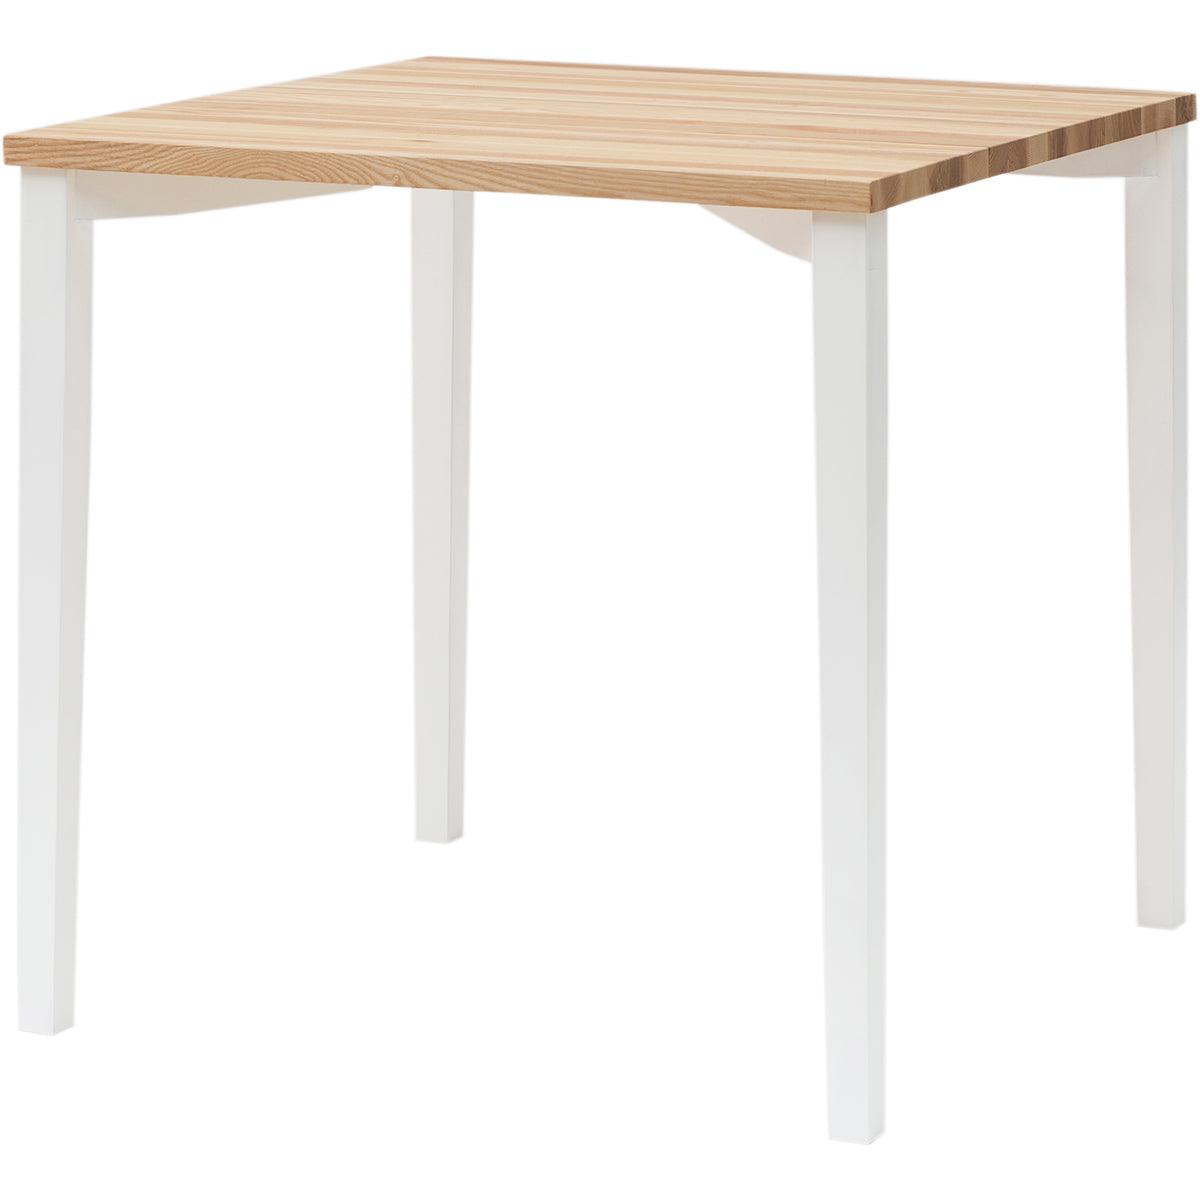 Triventi Dining Table - WOO .Design